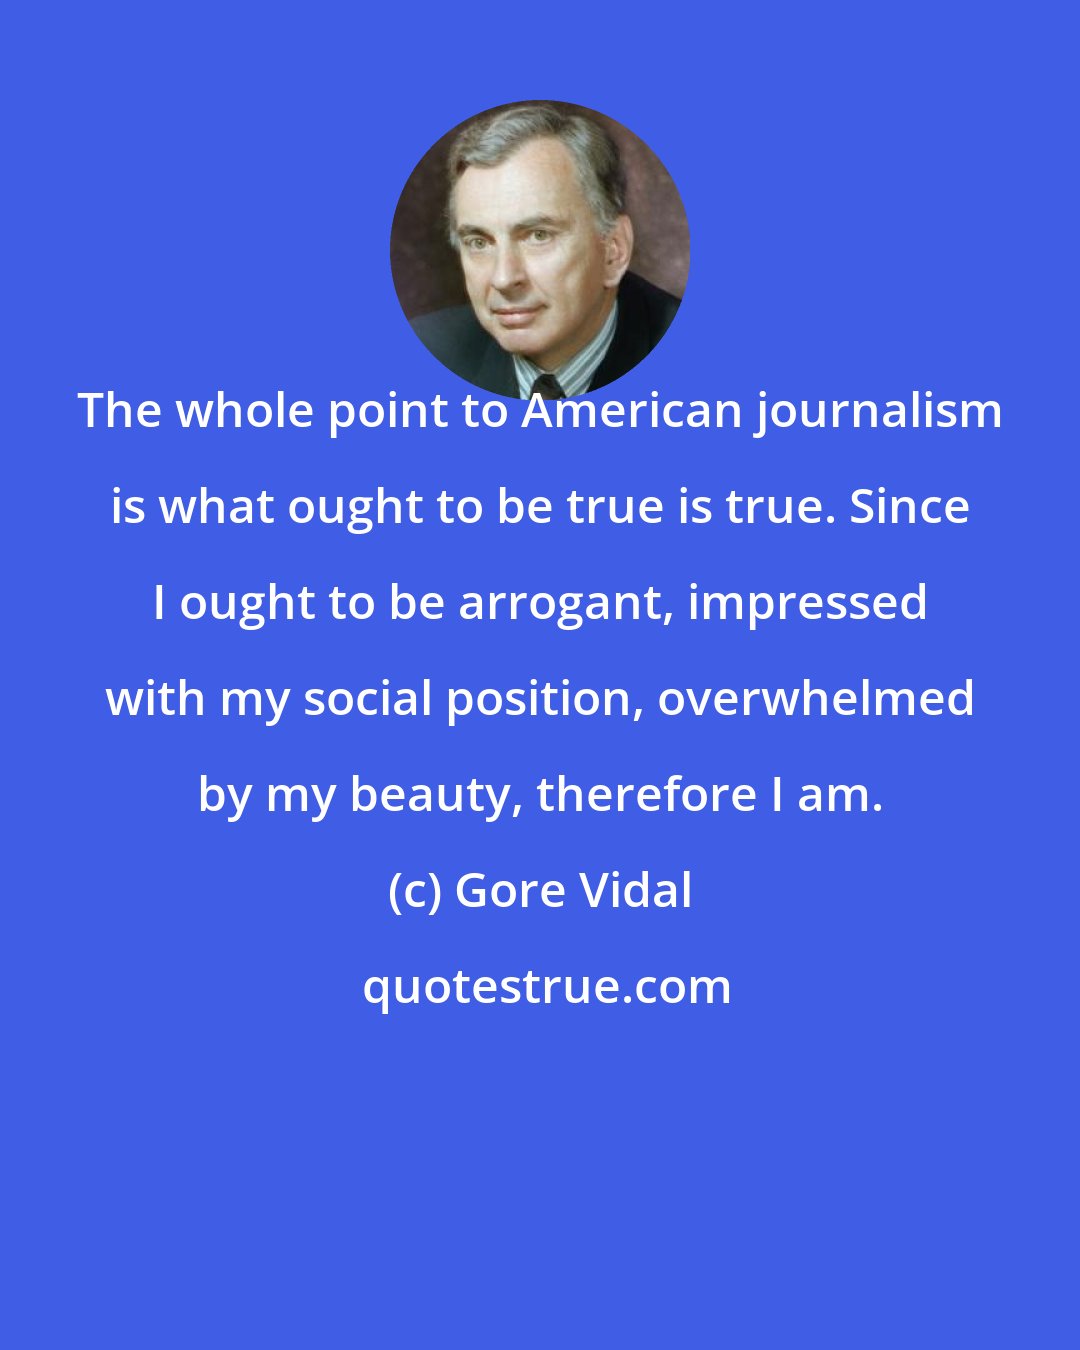 Gore Vidal: The whole point to American journalism is what ought to be true is true. Since I ought to be arrogant, impressed with my social position, overwhelmed by my beauty, therefore I am.